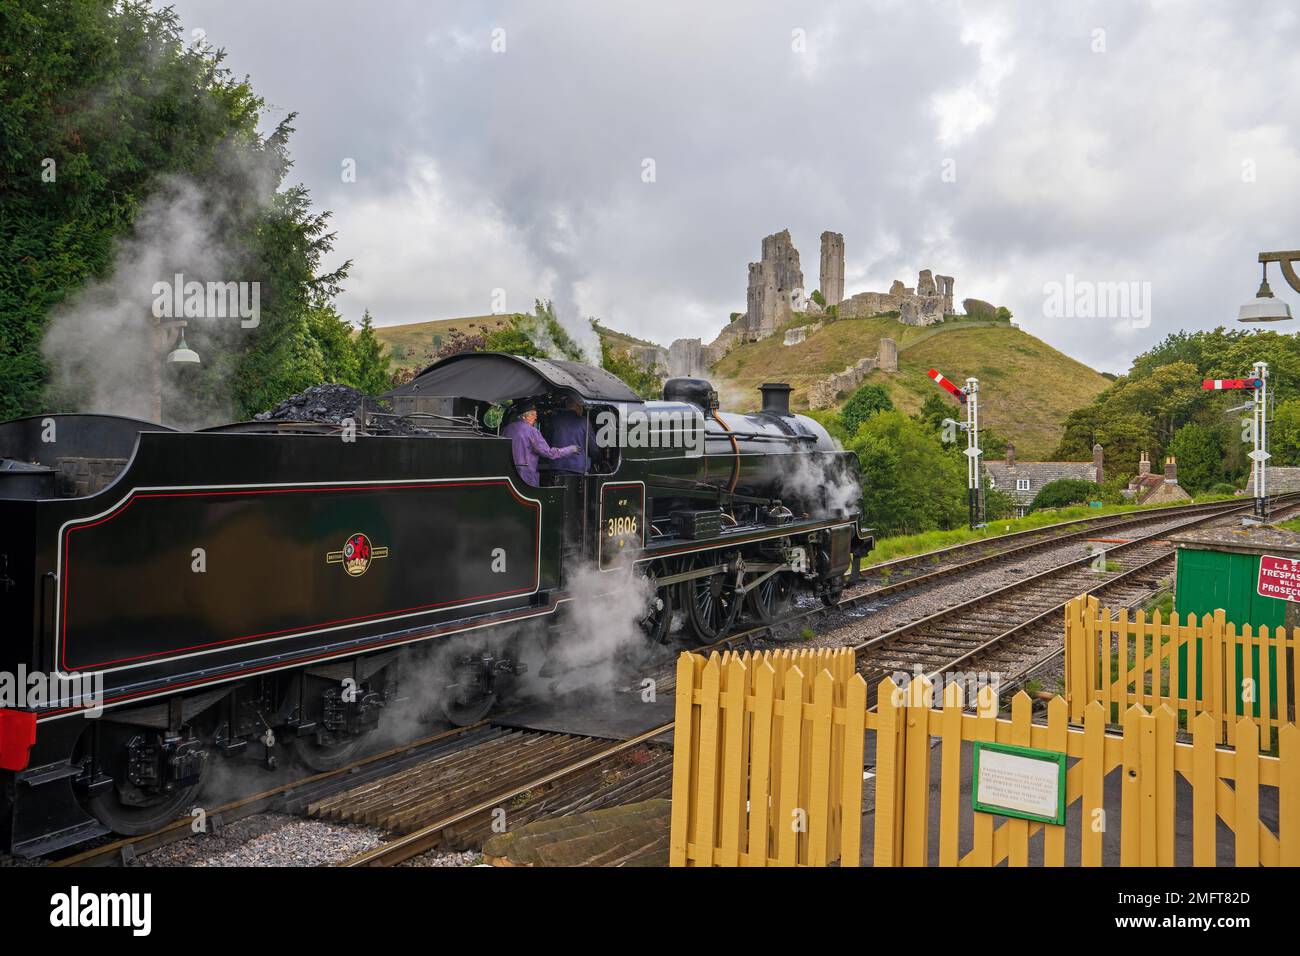 The SR U Class steam locomotive 31806 passes Corfe Castle on the Swanage Railway, as it travels between Corfe Castle station to Norden. Corfe, Dorset, Stock Photo